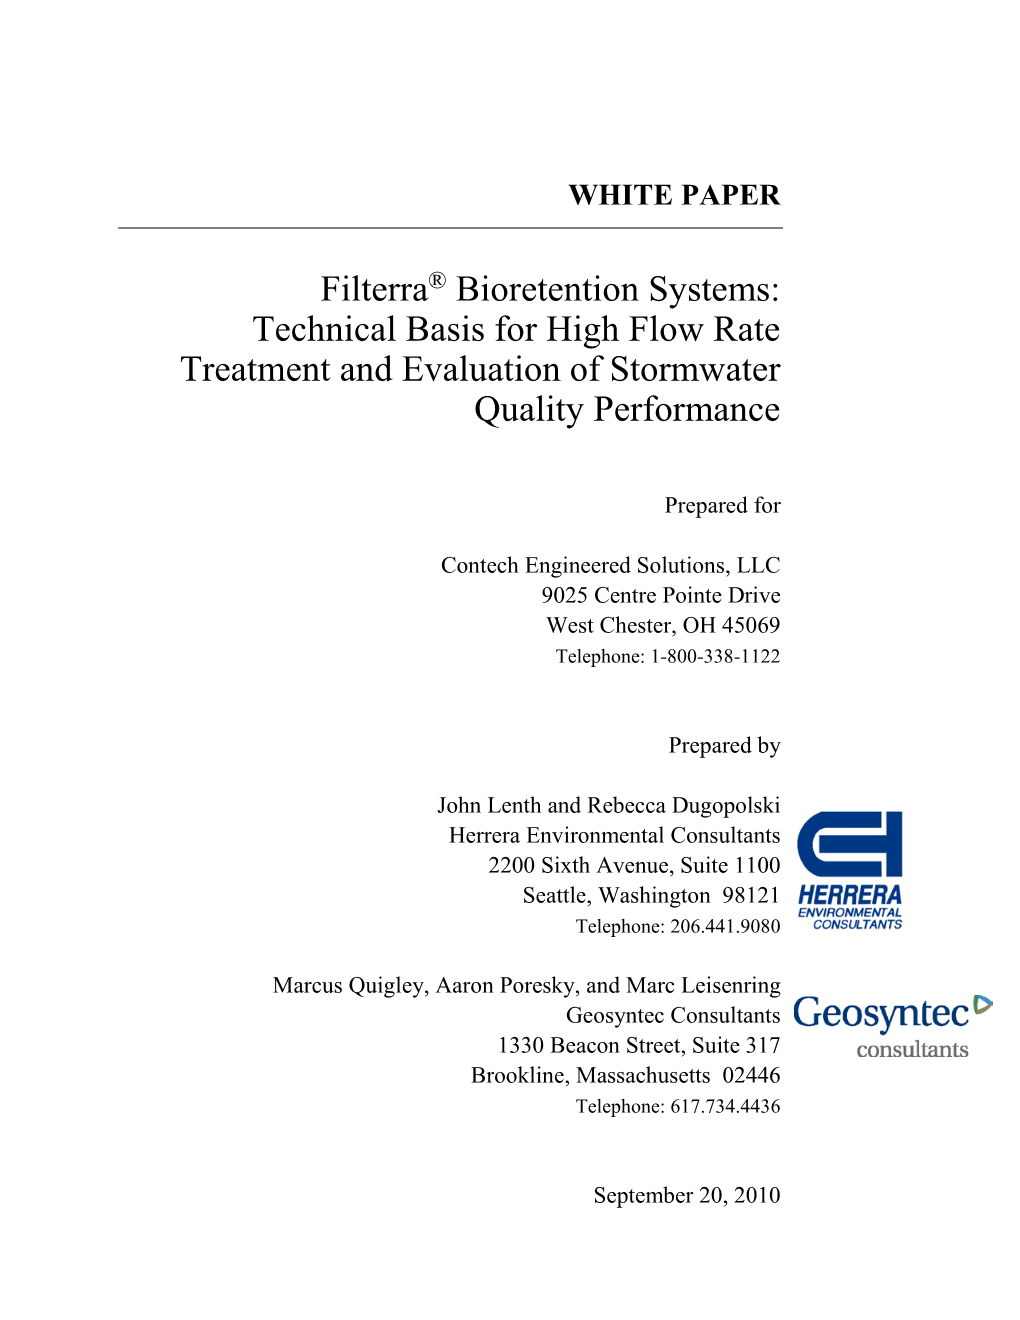 Technical Basis for High Flow Rate Treatment in the Filterra